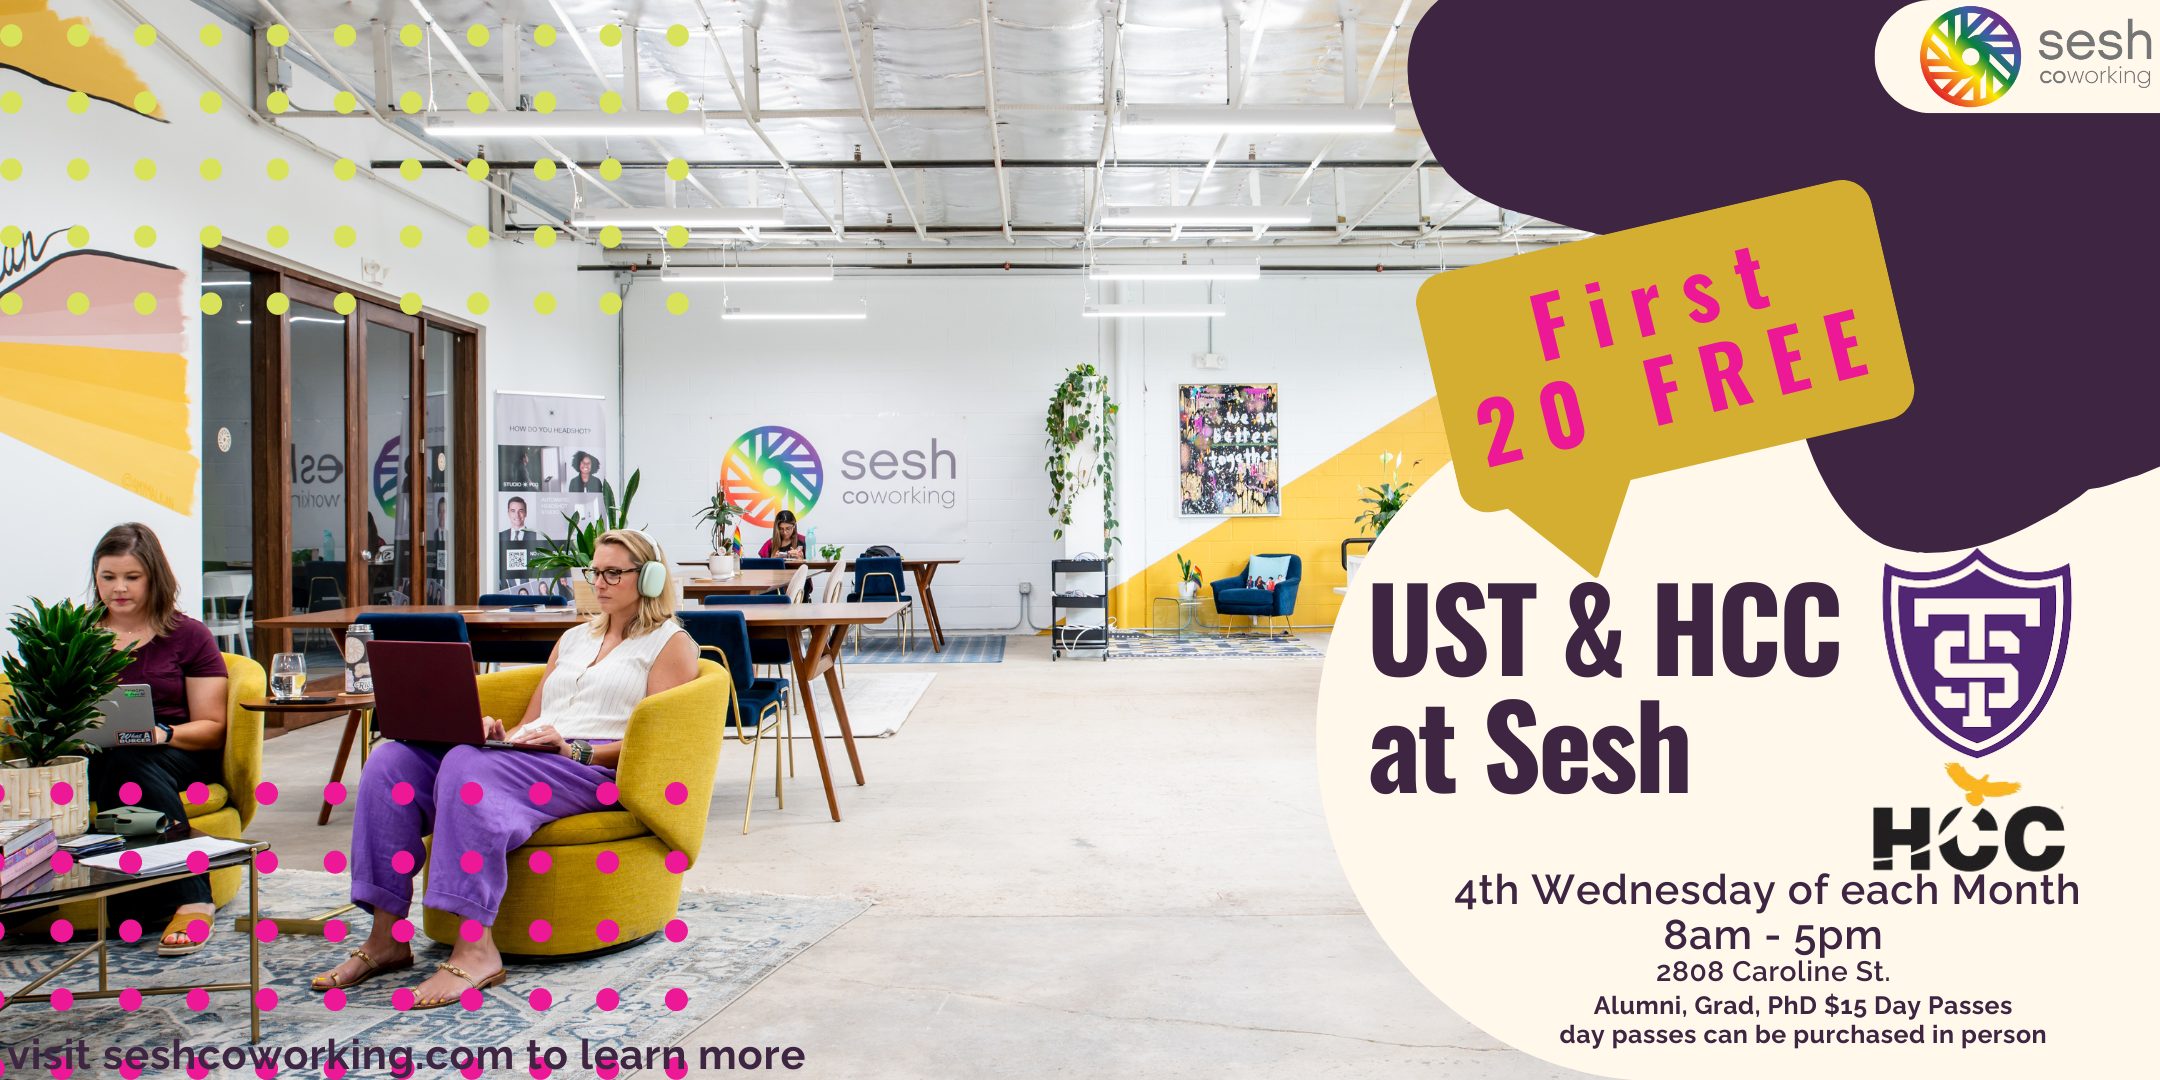 University of St Thomas and HCC @ Sesh every 4th wednesday for discounted coworking